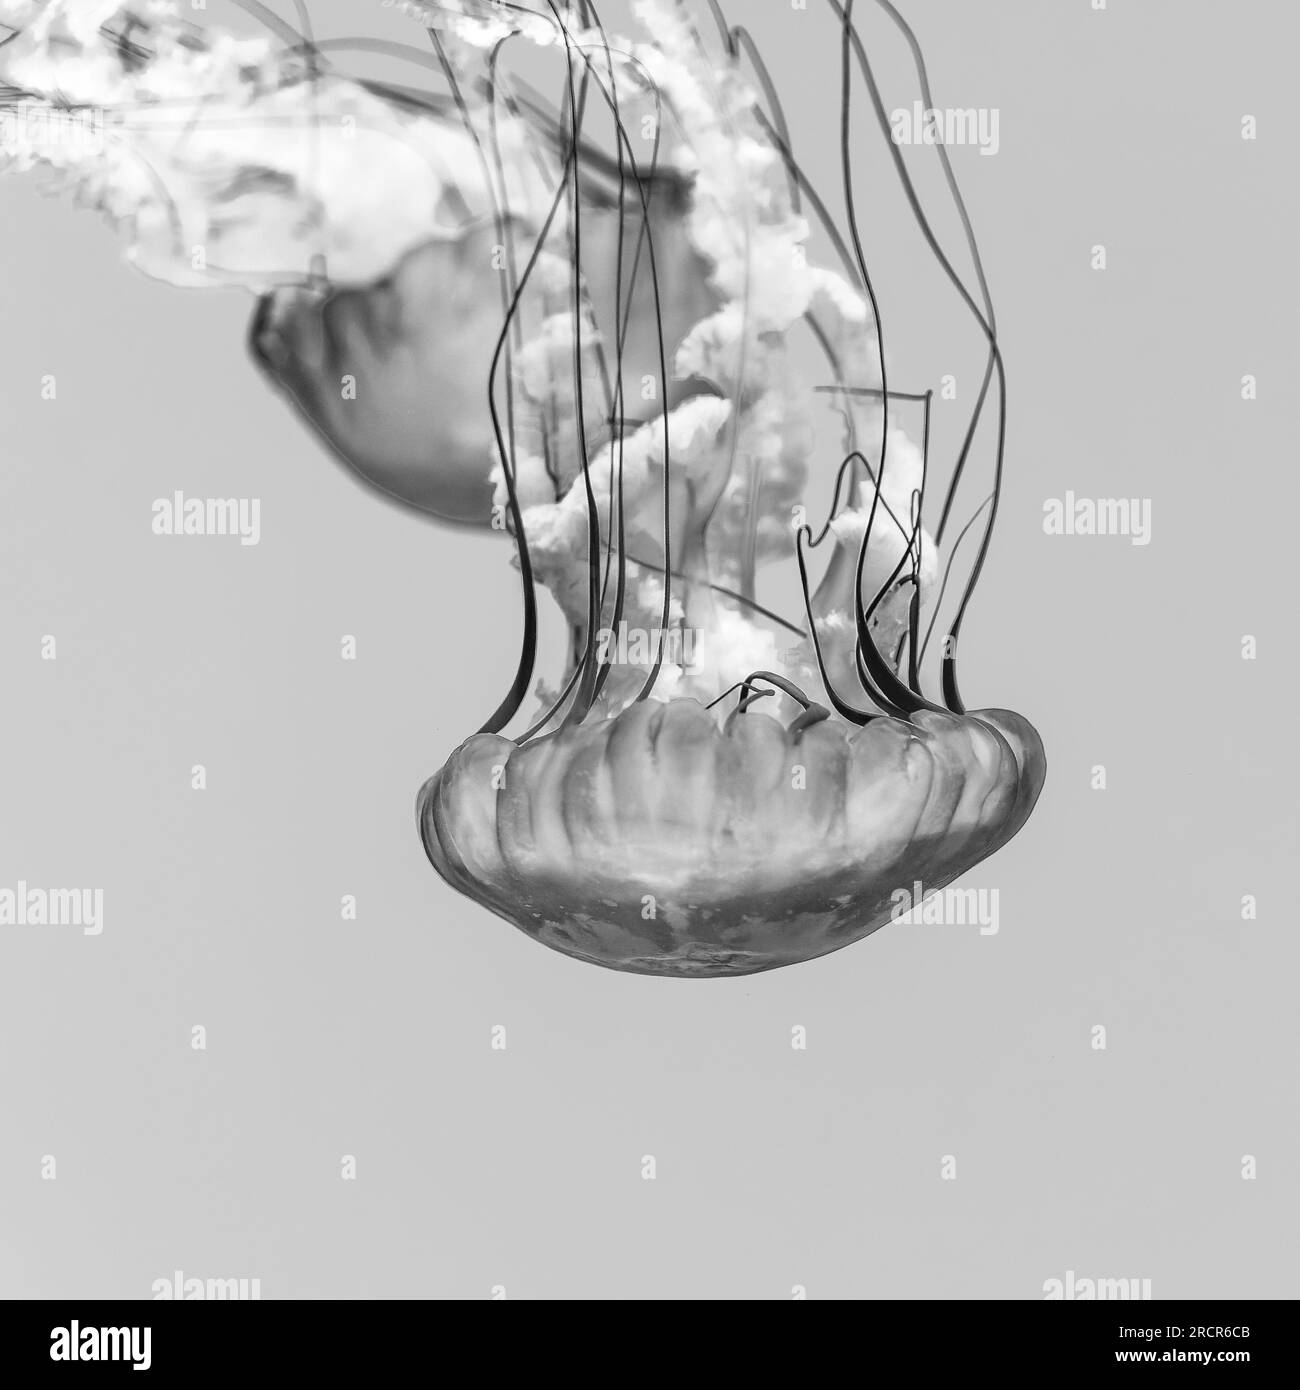 Group of Atlantic Bay Nettle Jellyfish in Black and White Stock Photo